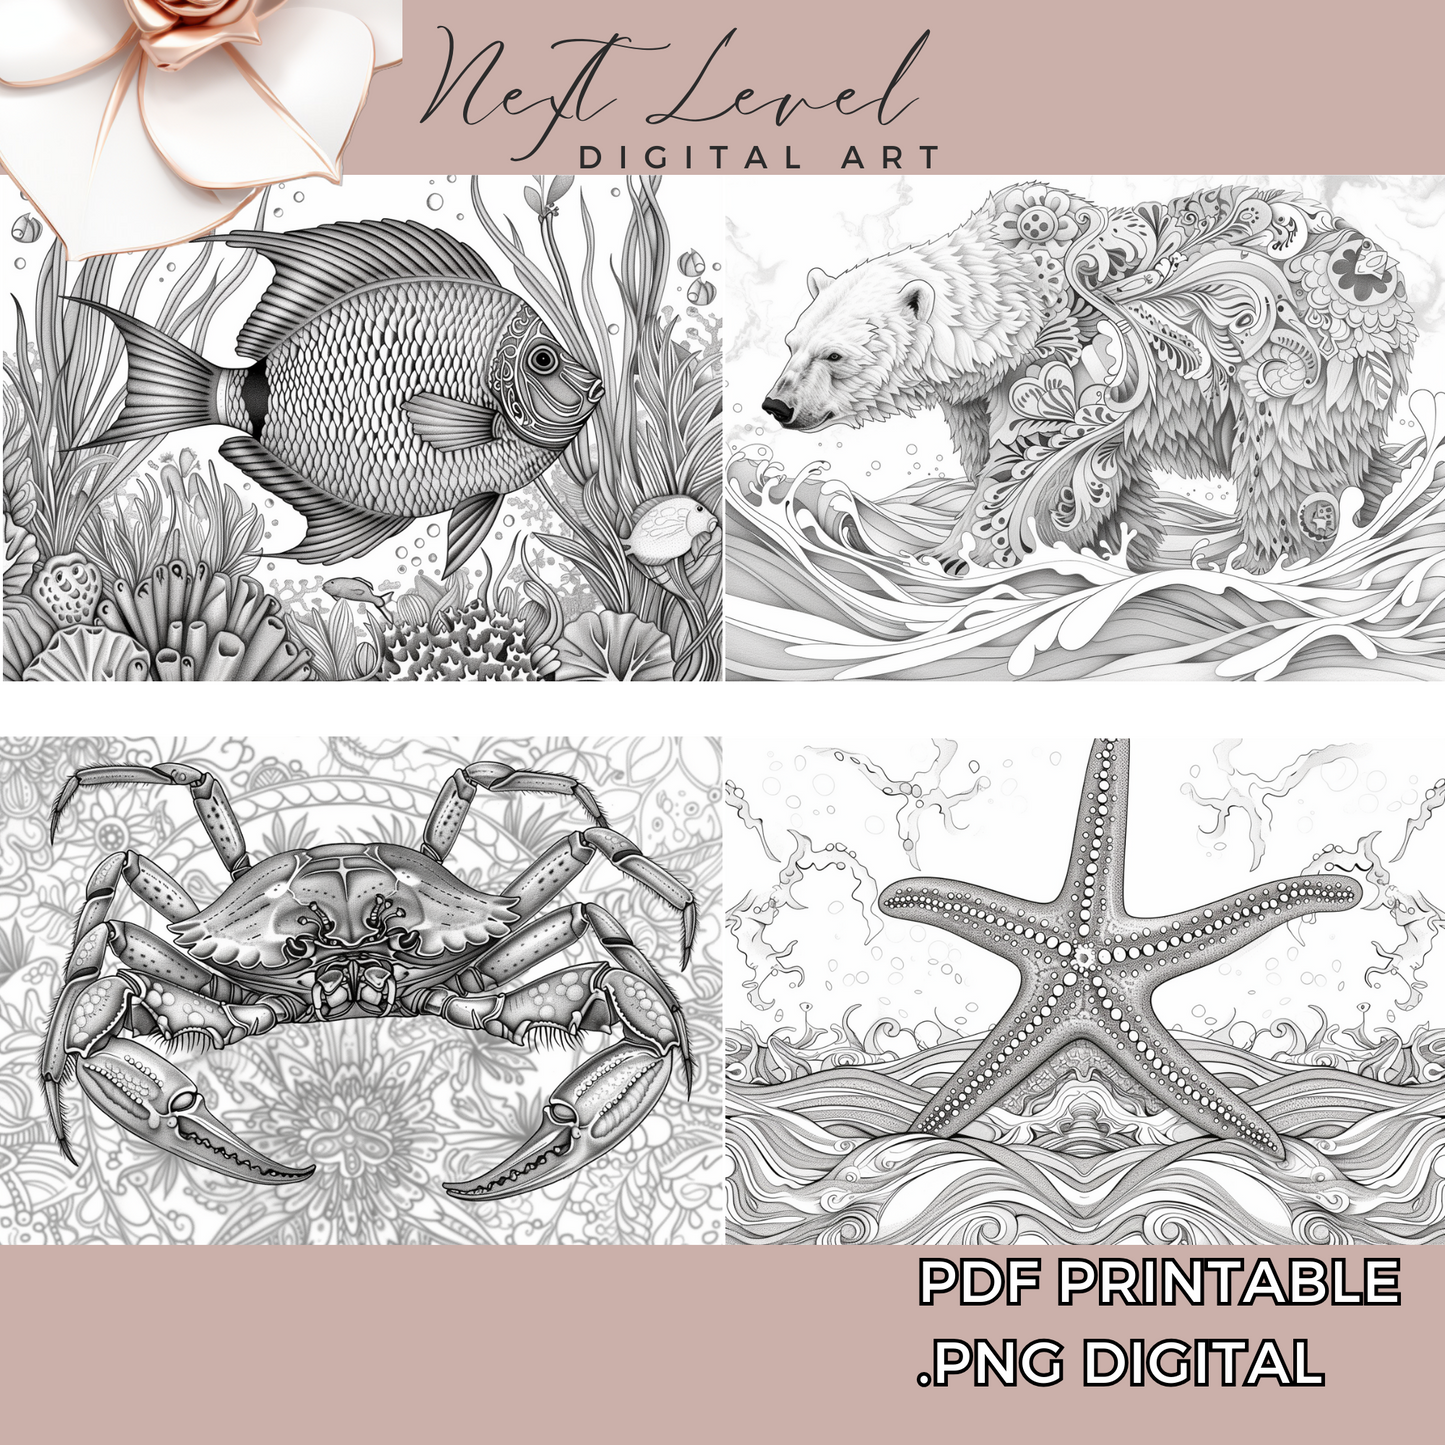 Ocean Coloring Sheets Detailed Adult Coloring Printable Grayscale Digital Coloring Book Pages Available in PDF | PNG For Procreate